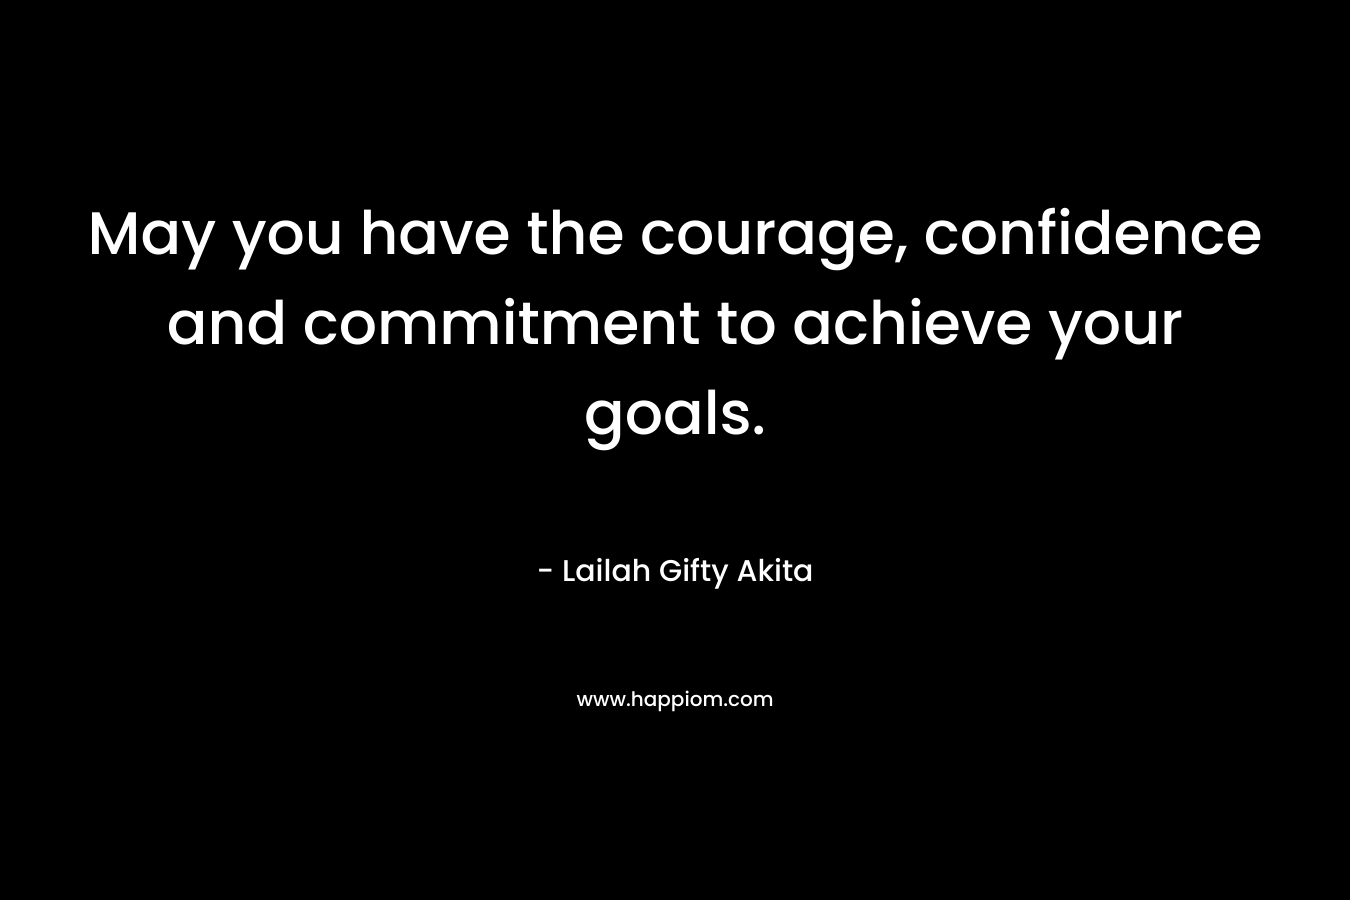 May you have the courage, confidence and commitment to achieve your goals.